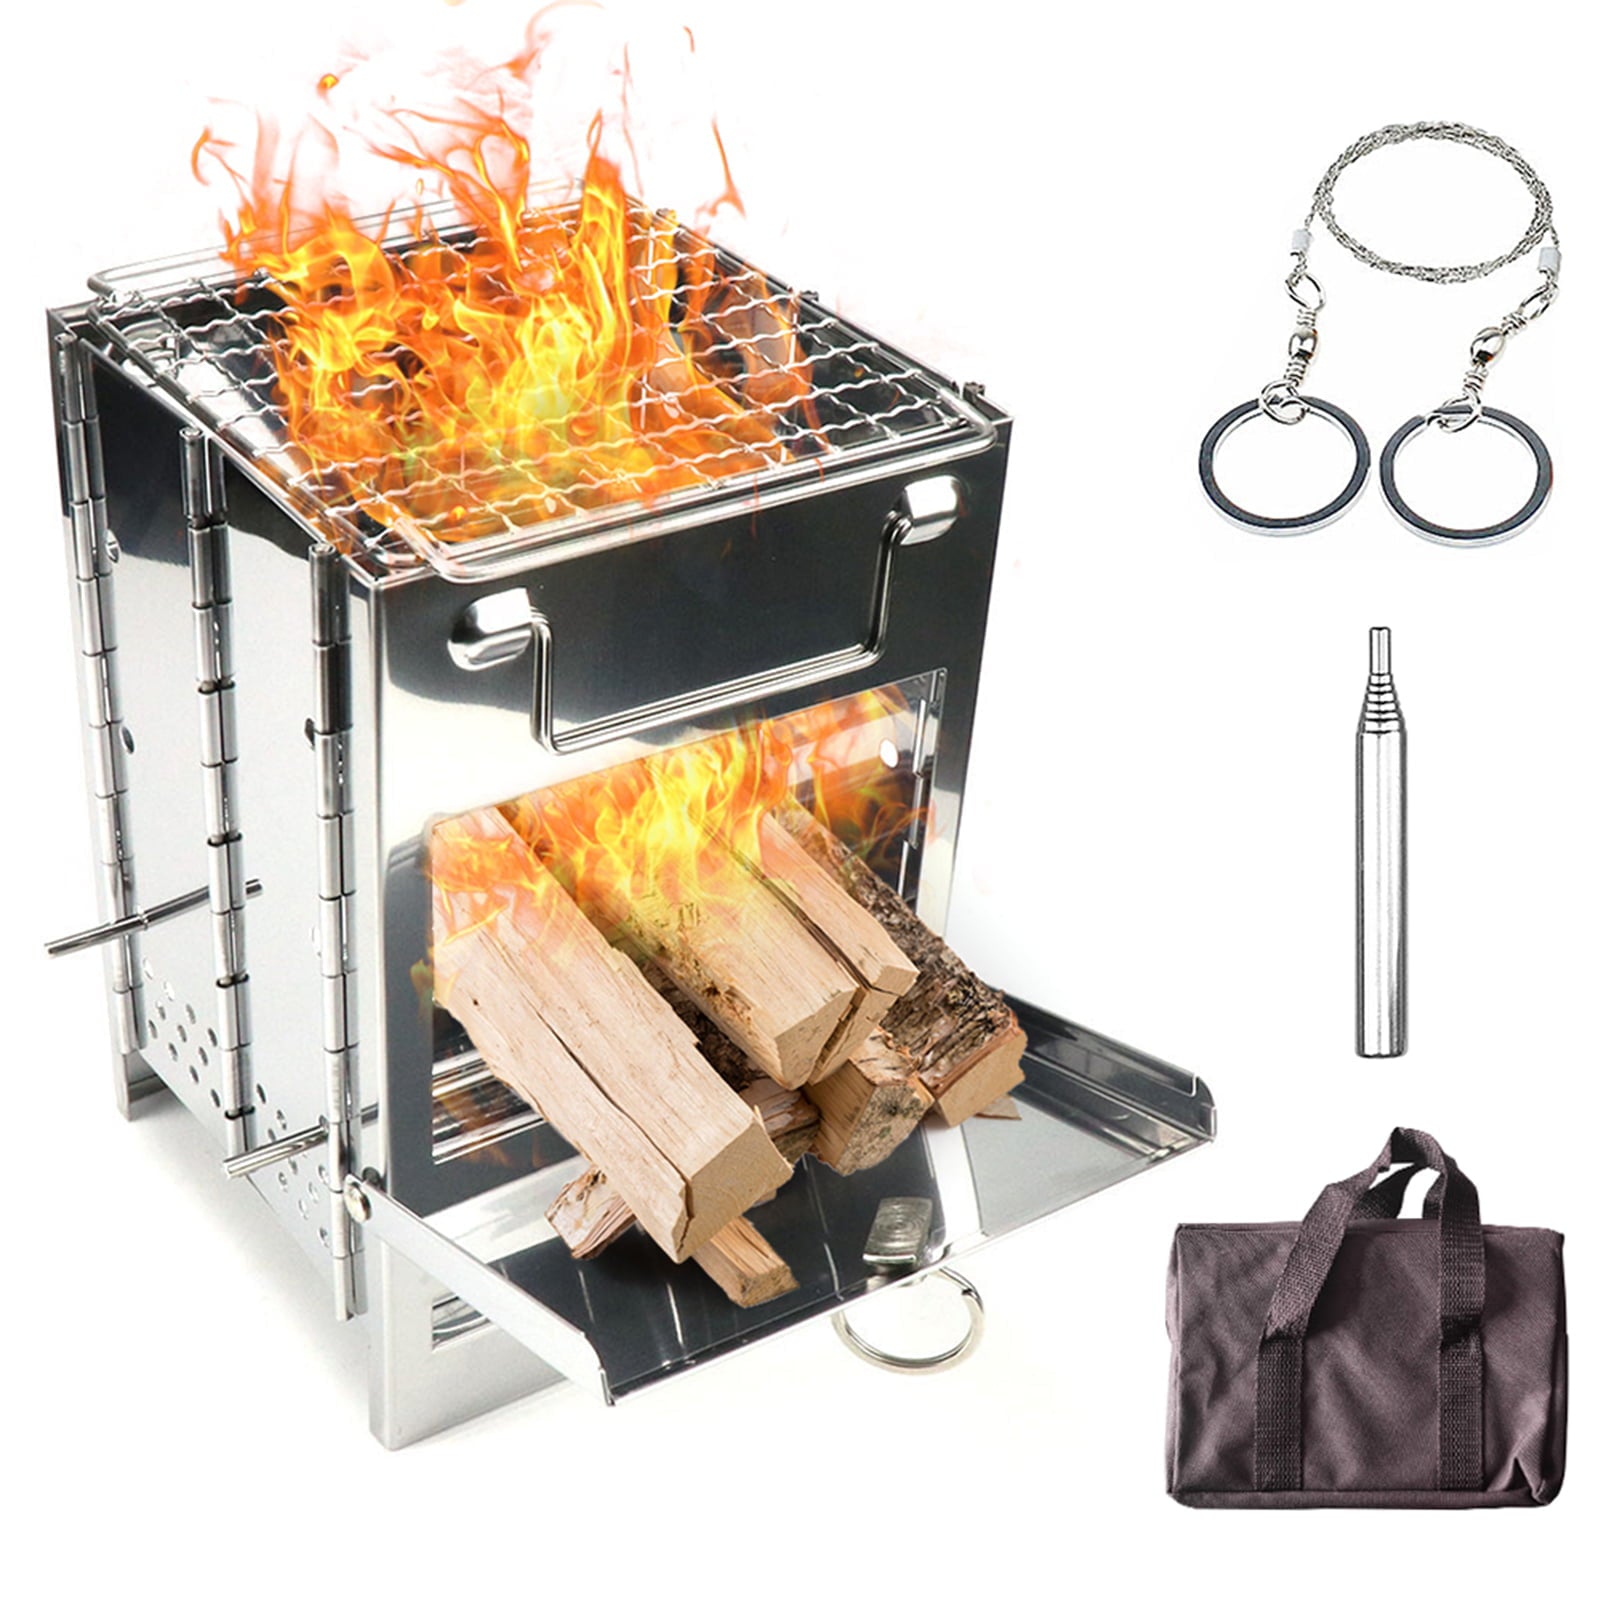 Dcenta Folding Wood Burning Stove, with Carry Bag for Backpacking Hiking Camping Cooking